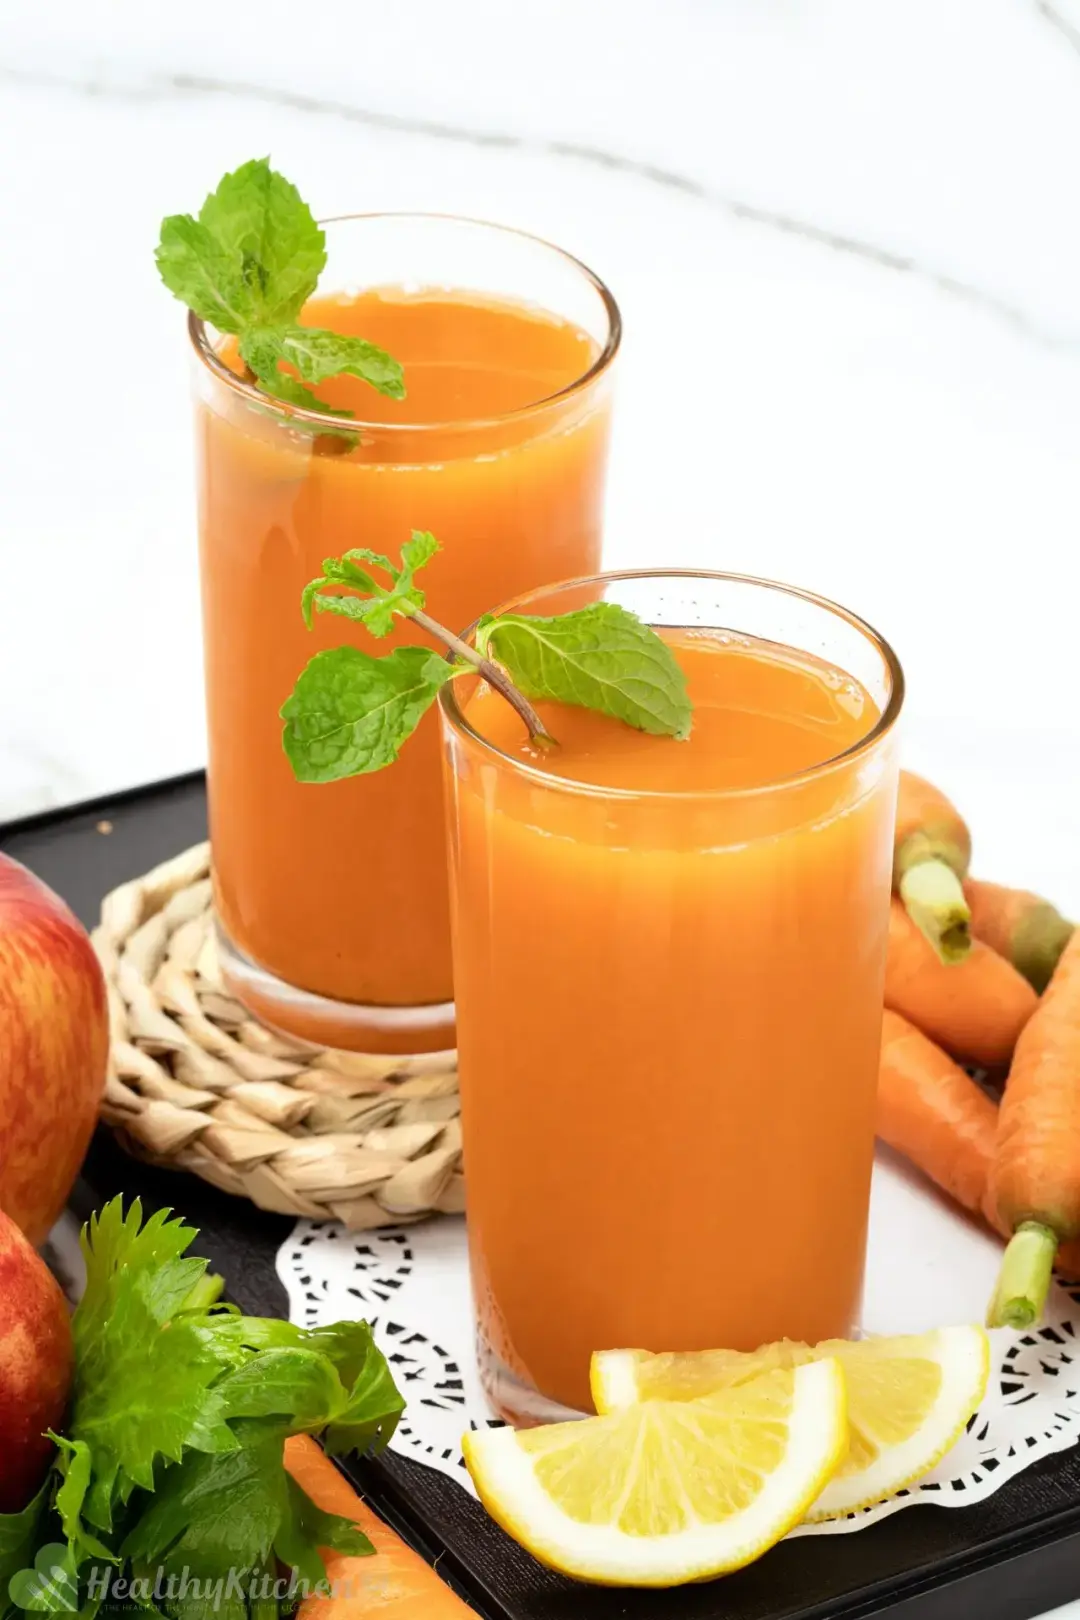 Benefits of Celery Juice with Carrots